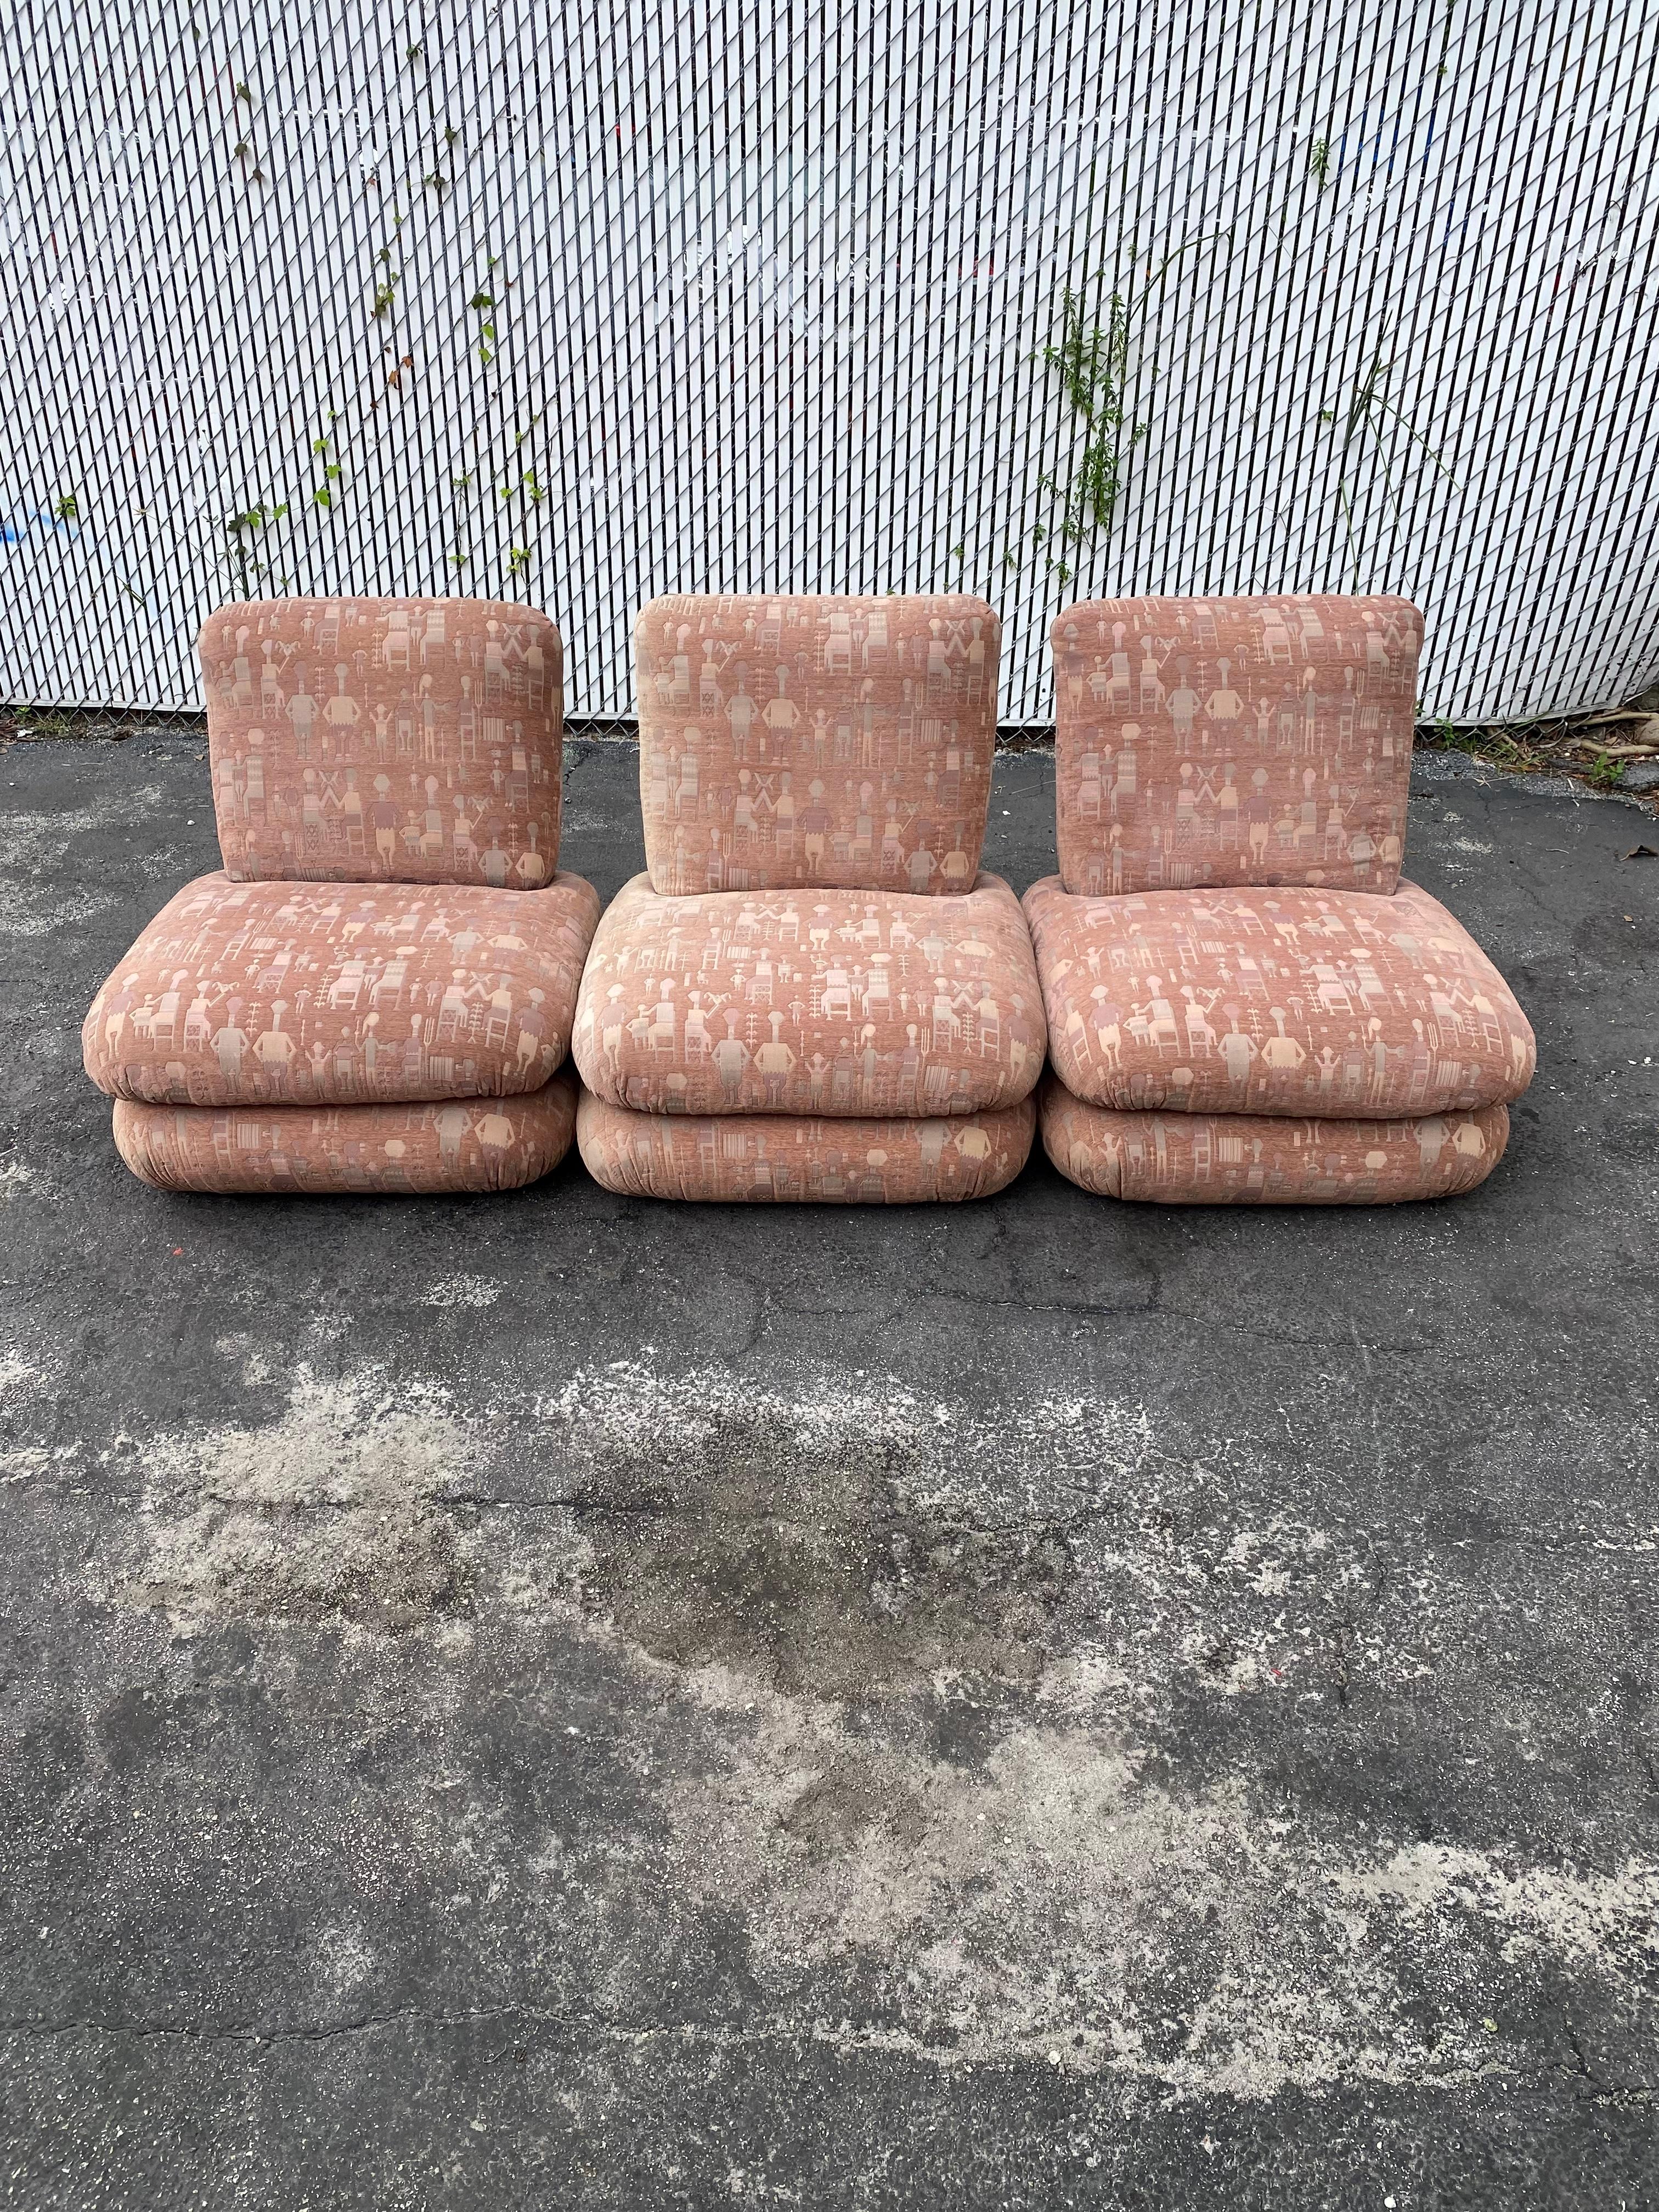 On offer on this occasion is one of the most stunning modular sectional you could hope to find. This is an ultra-rare opportunity to acquire what is, unequivocally, the best of the best, it being a most spectacular and beautifully-presented